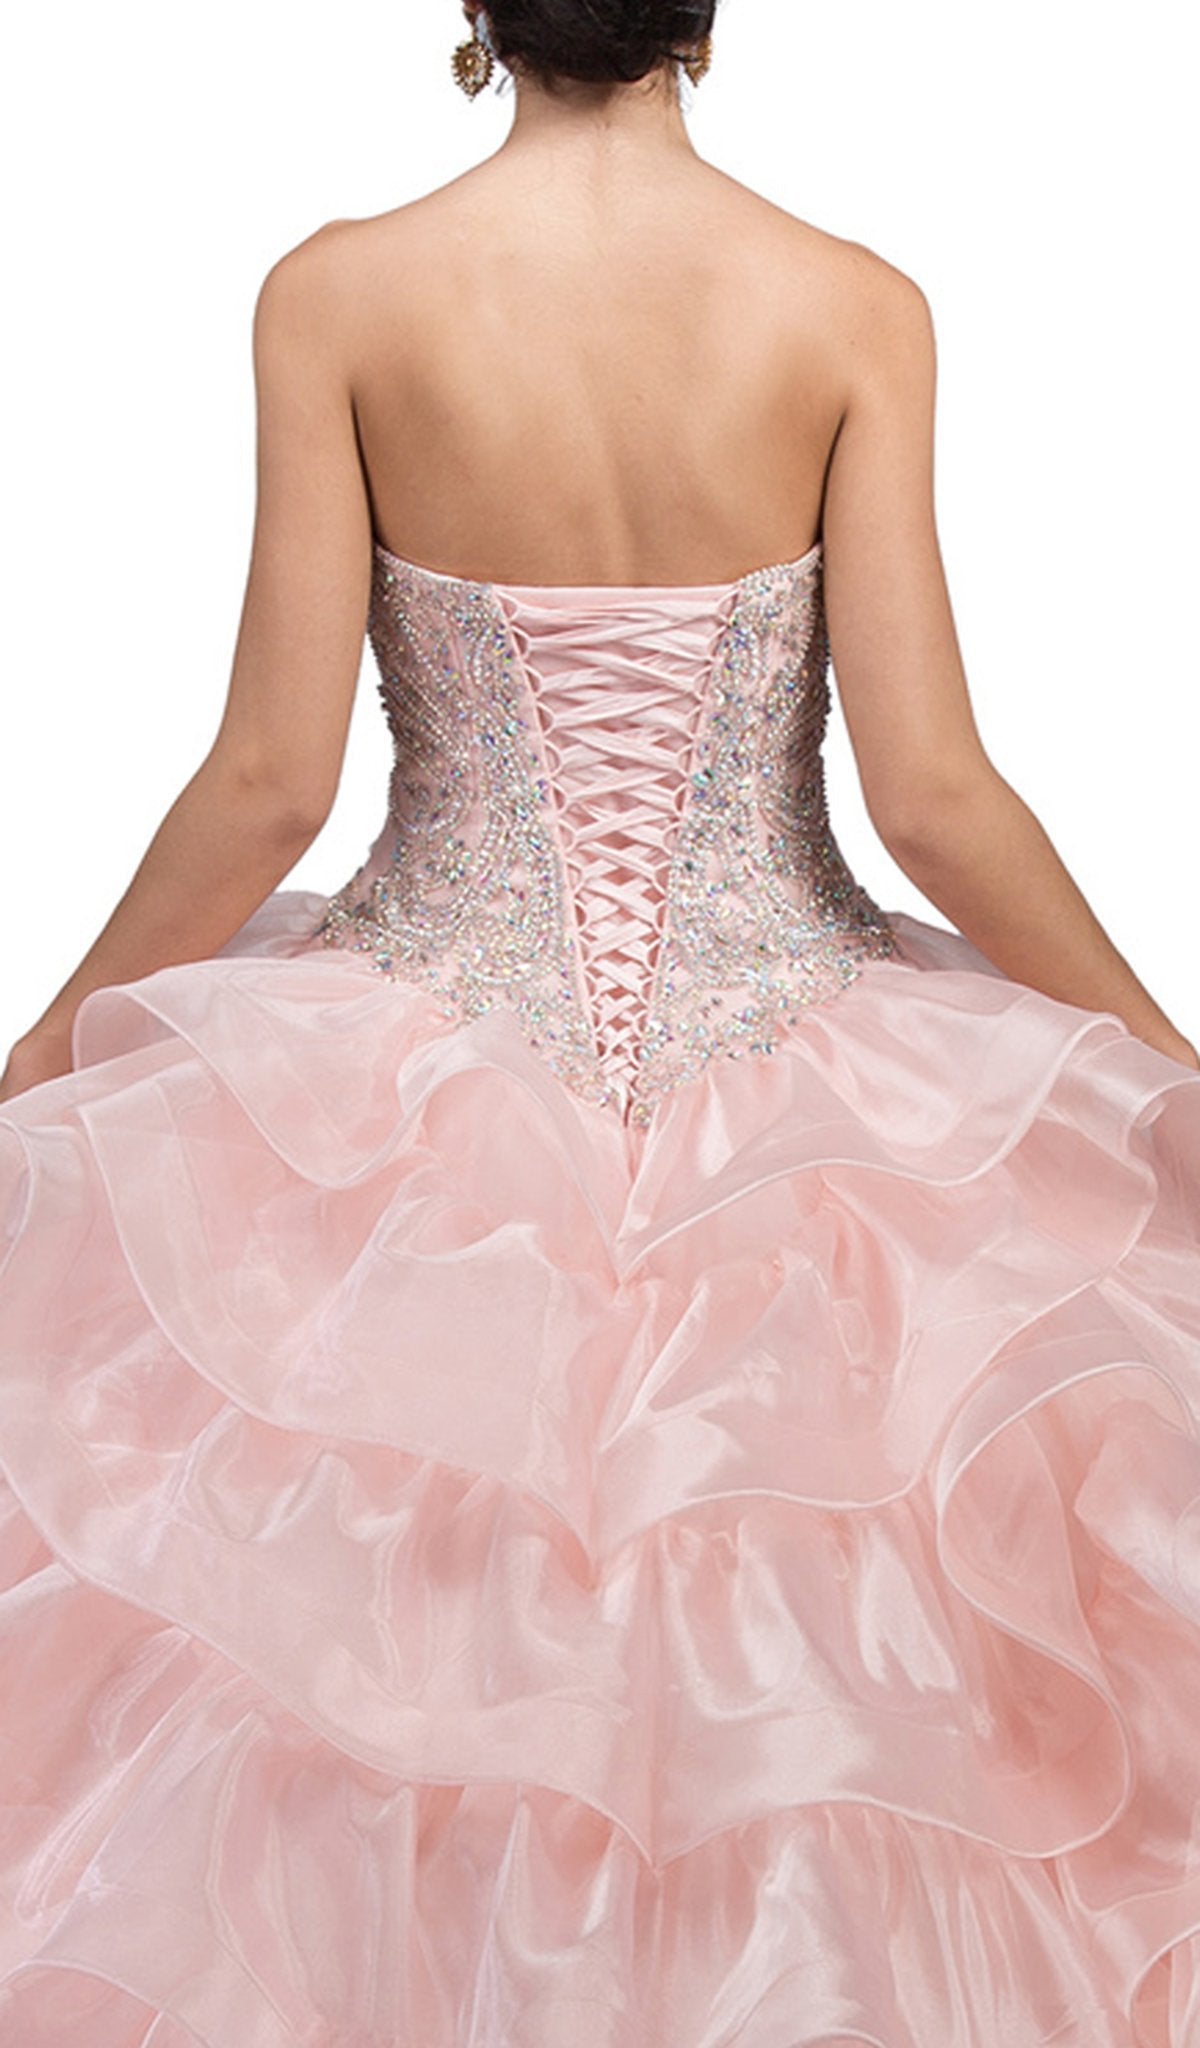 Dancing Queen - 1216 Strapless Bedazzled Sweetheart Ruffled Quinceanera Ballgown Special Occasion Dress L / Blush